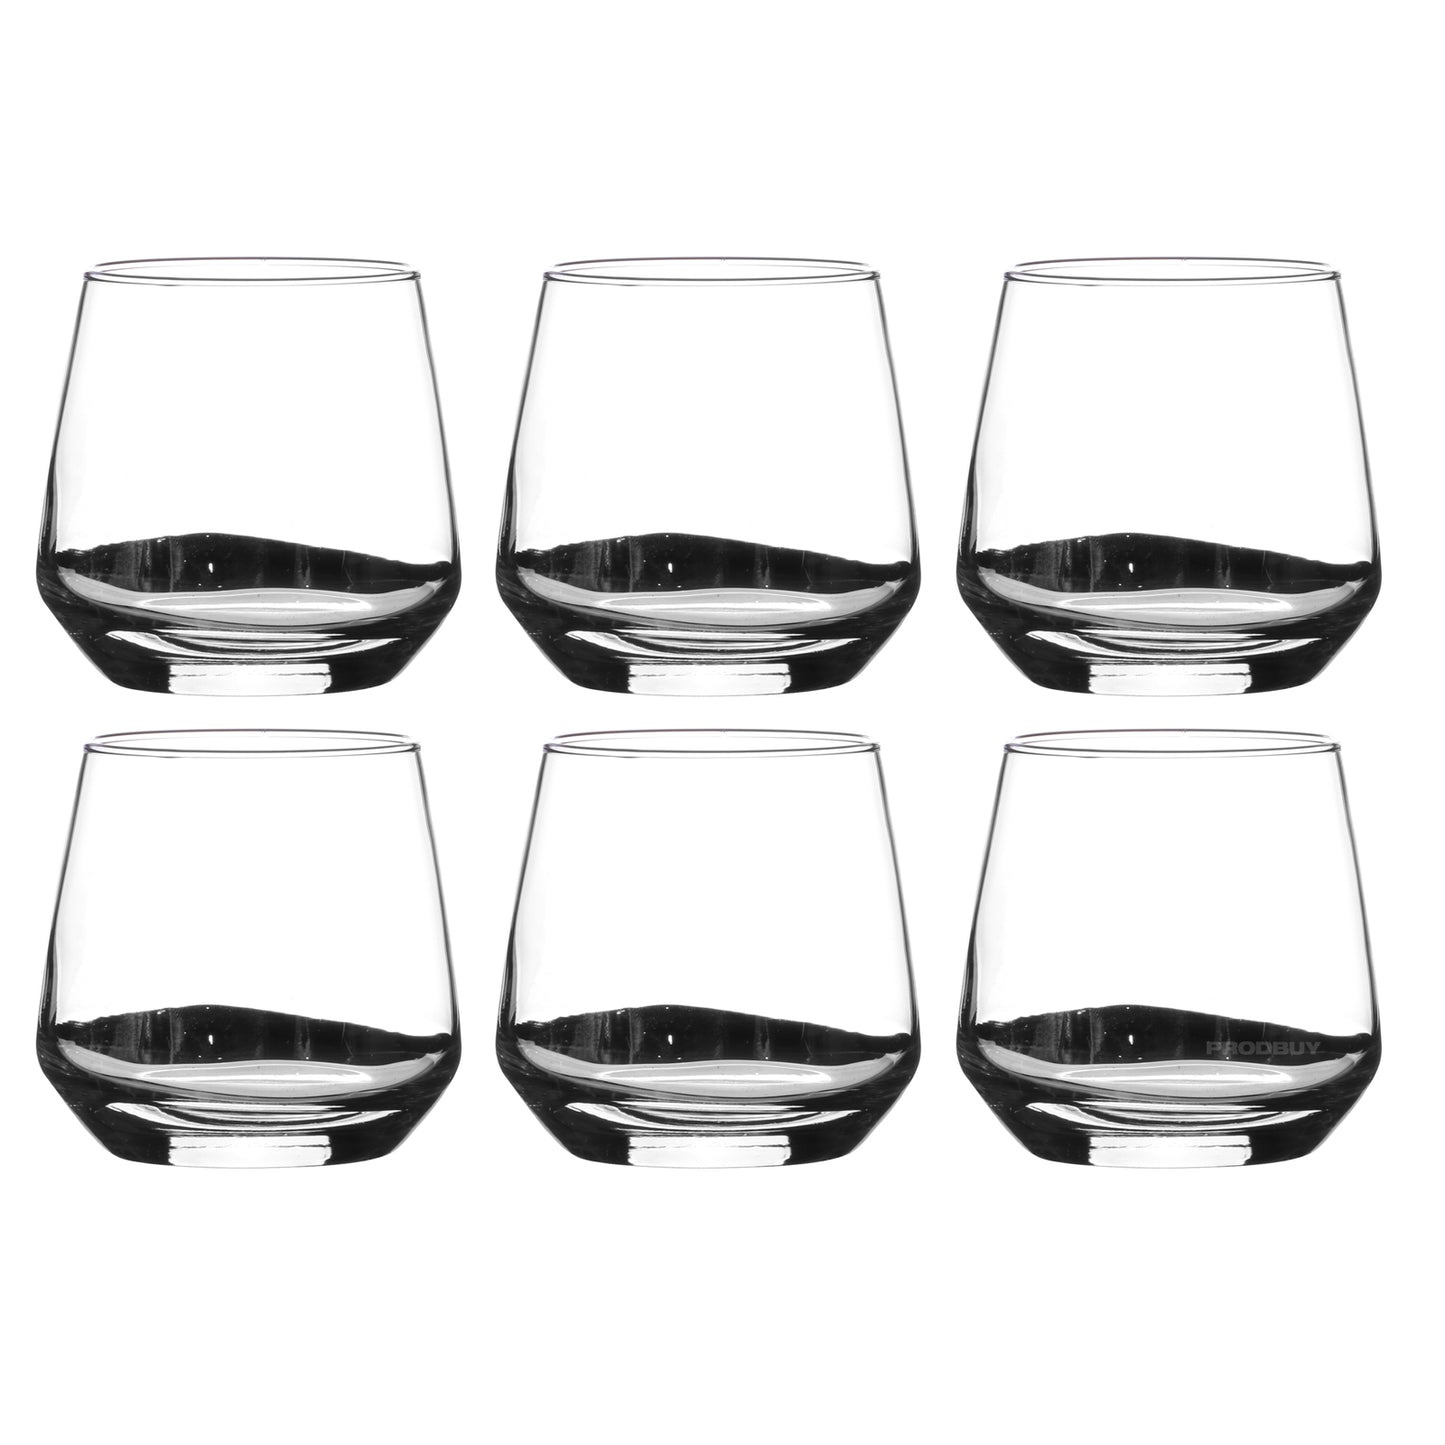 Set of 6 Short Glass Drinking Tumblers